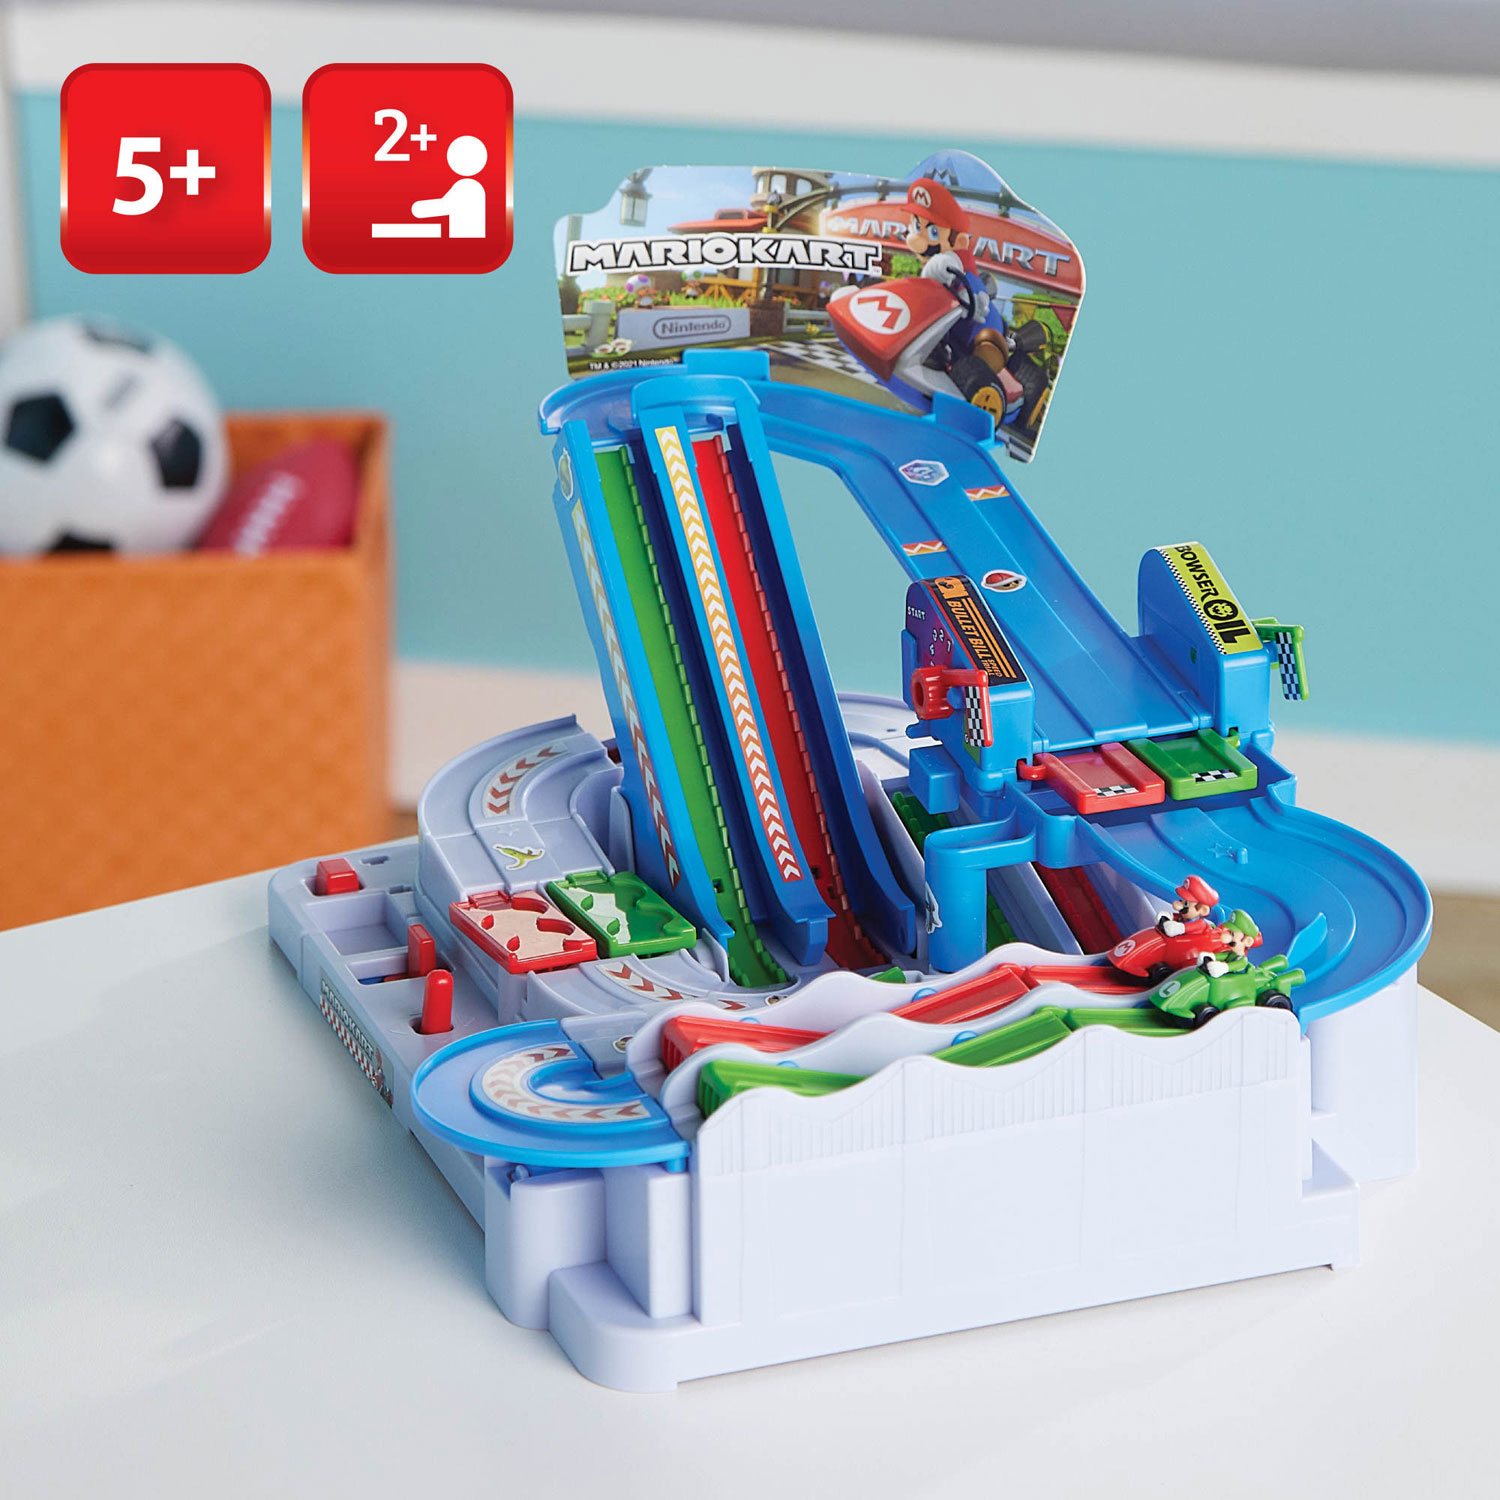 Hardware Review: Race Away With Mario Kart Pro Mini & Deluxe